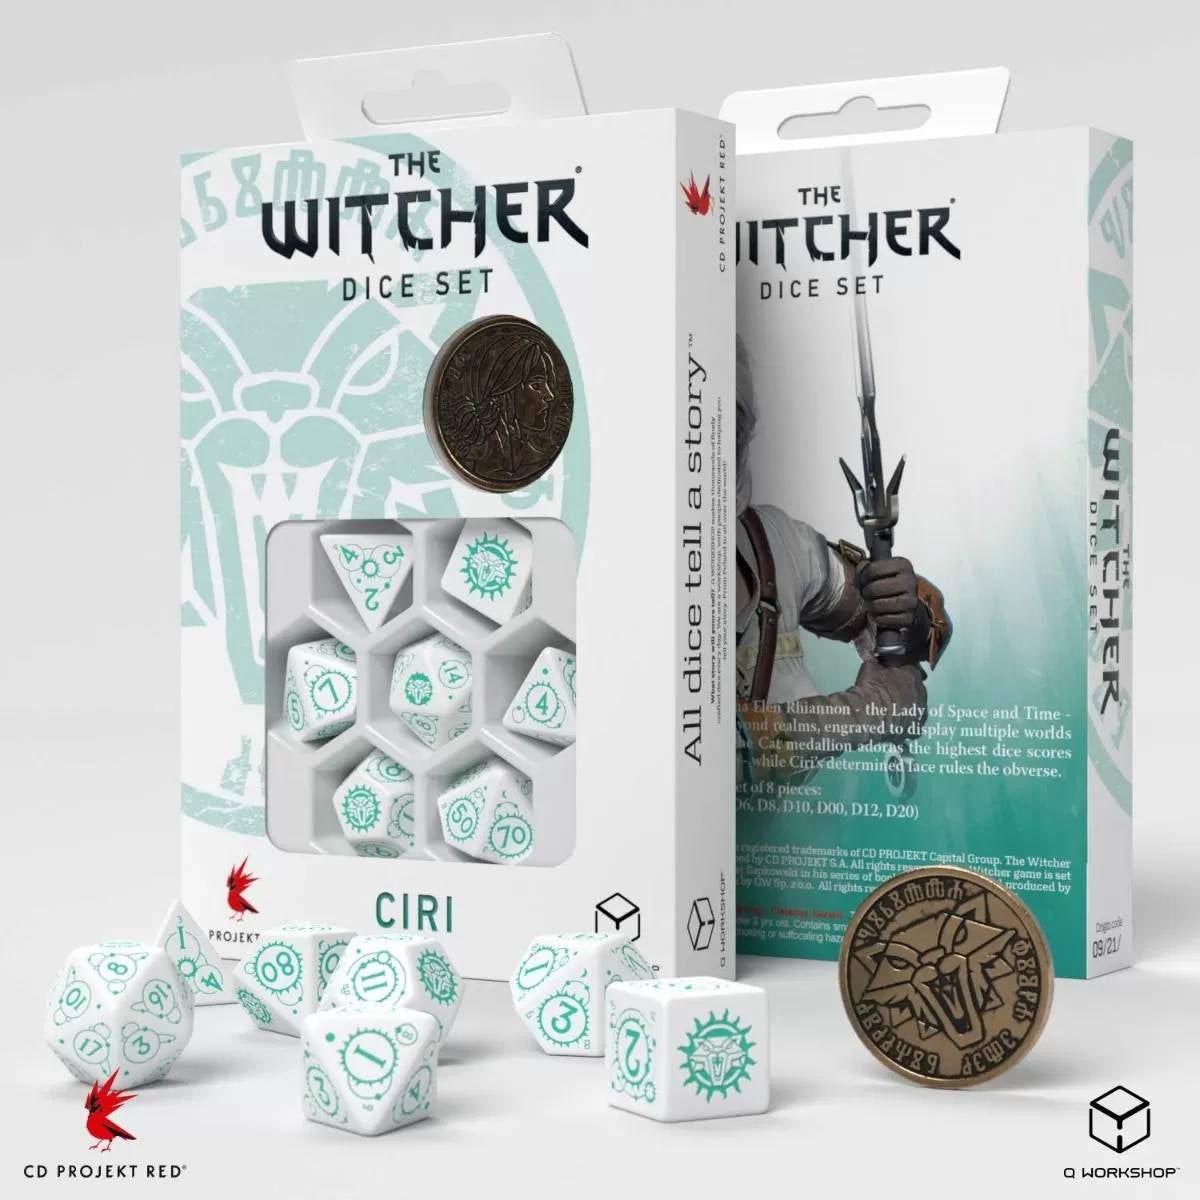 Q Workshop - The Witcher Dice Set Ciri - The Law of Surprise